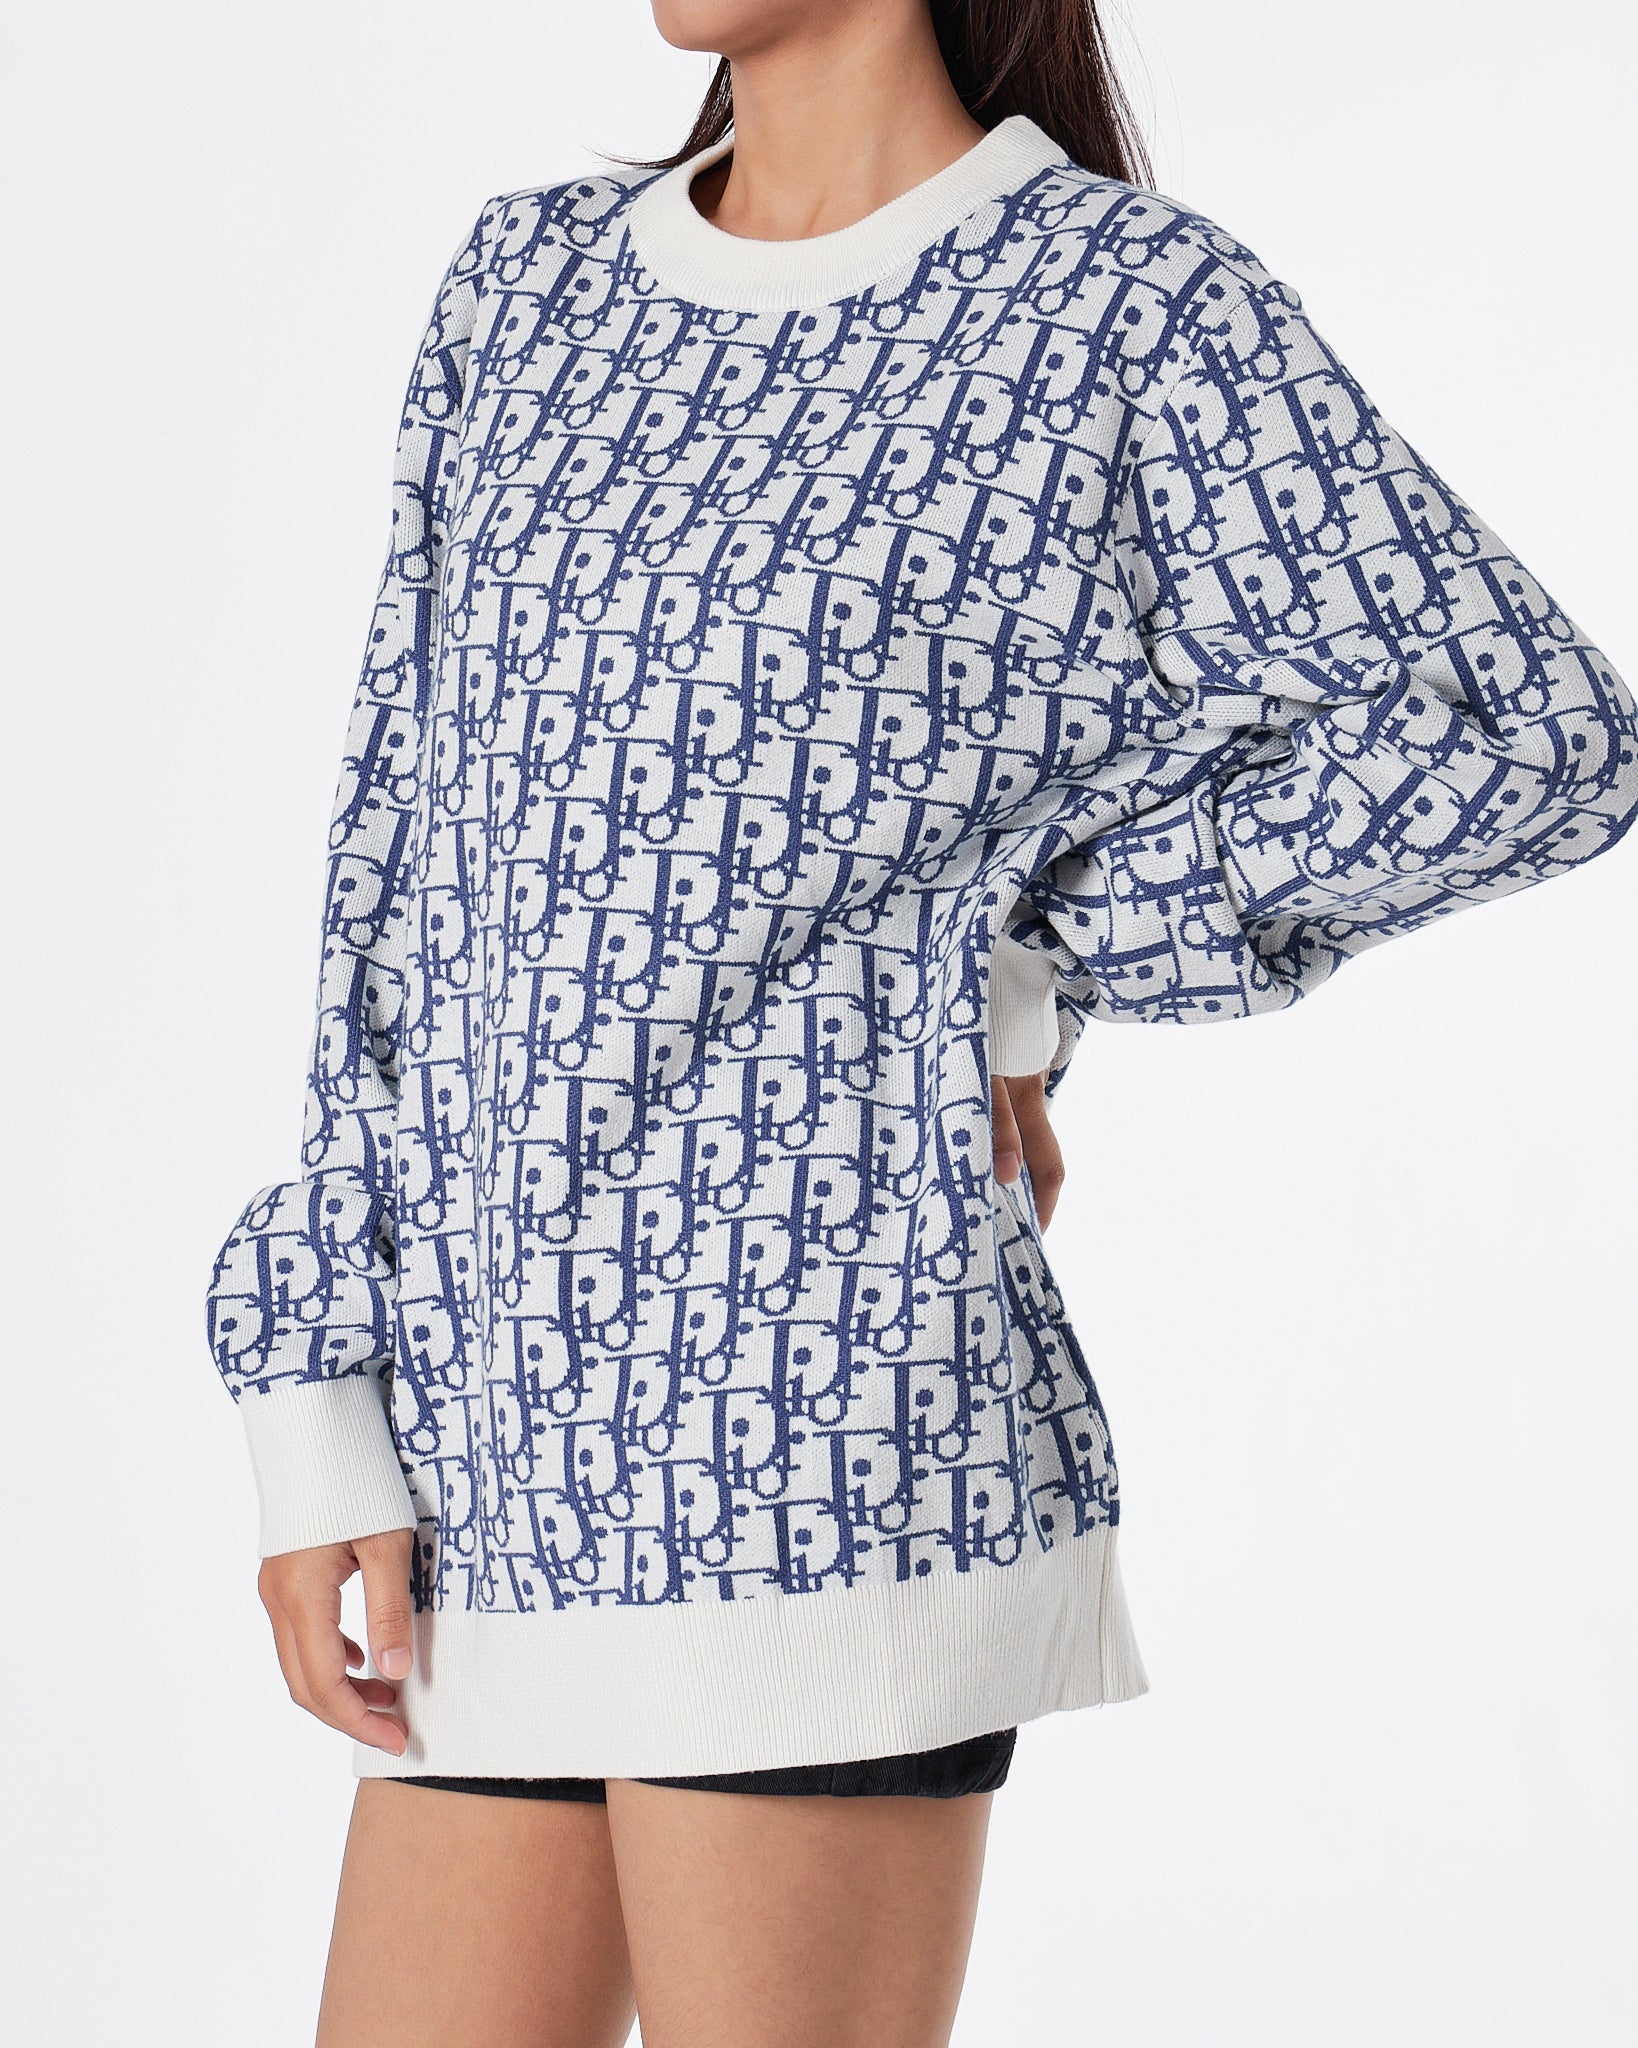 CD Monogram Over Printed Unisex Soft Knit Sweater 59.90